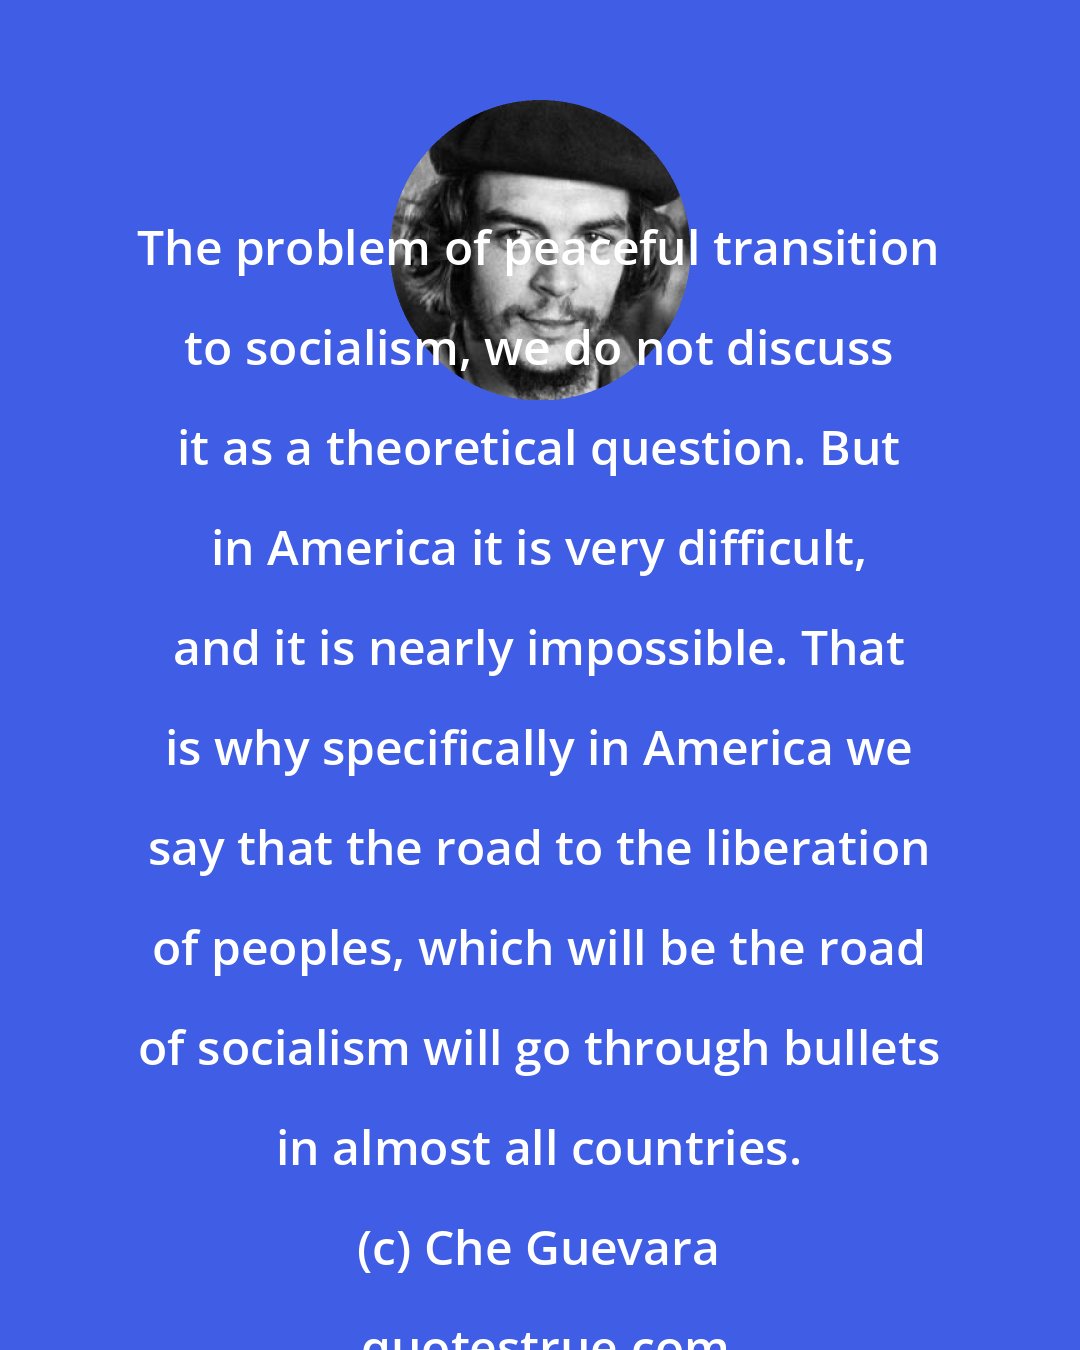 Che Guevara: The problem of peaceful transition to socialism, we do not discuss it as a theoretical question. But in America it is very difficult, and it is nearly impossible. That is why specifically in America we say that the road to the liberation of peoples, which will be the road of socialism will go through bullets in almost all countries.